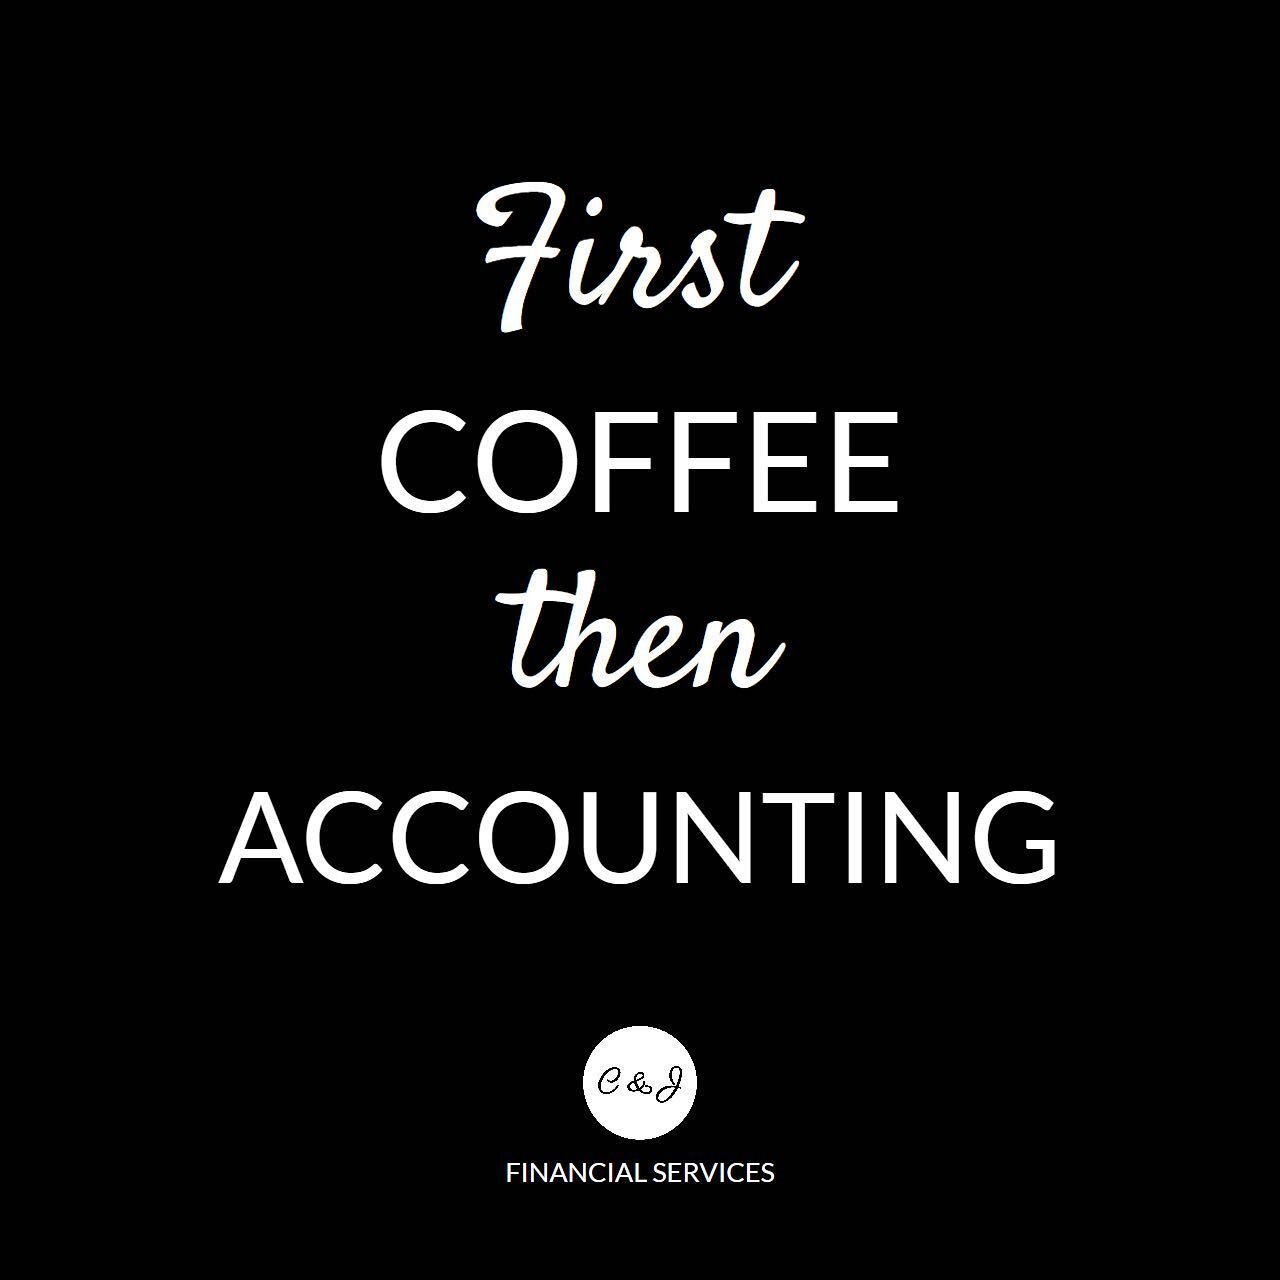 Happy Monday! A new day and a new week, we&rsquo;re ready to work our &ldquo;assets&rdquo; off. 😝
﻿
﻿Hope you&rsquo;re off to a productive week too!✌🏼 #goalgetters #motivationmonday #coffee #kauaiaccountants #smallbusiness #kauaibusiness #bookkeepe